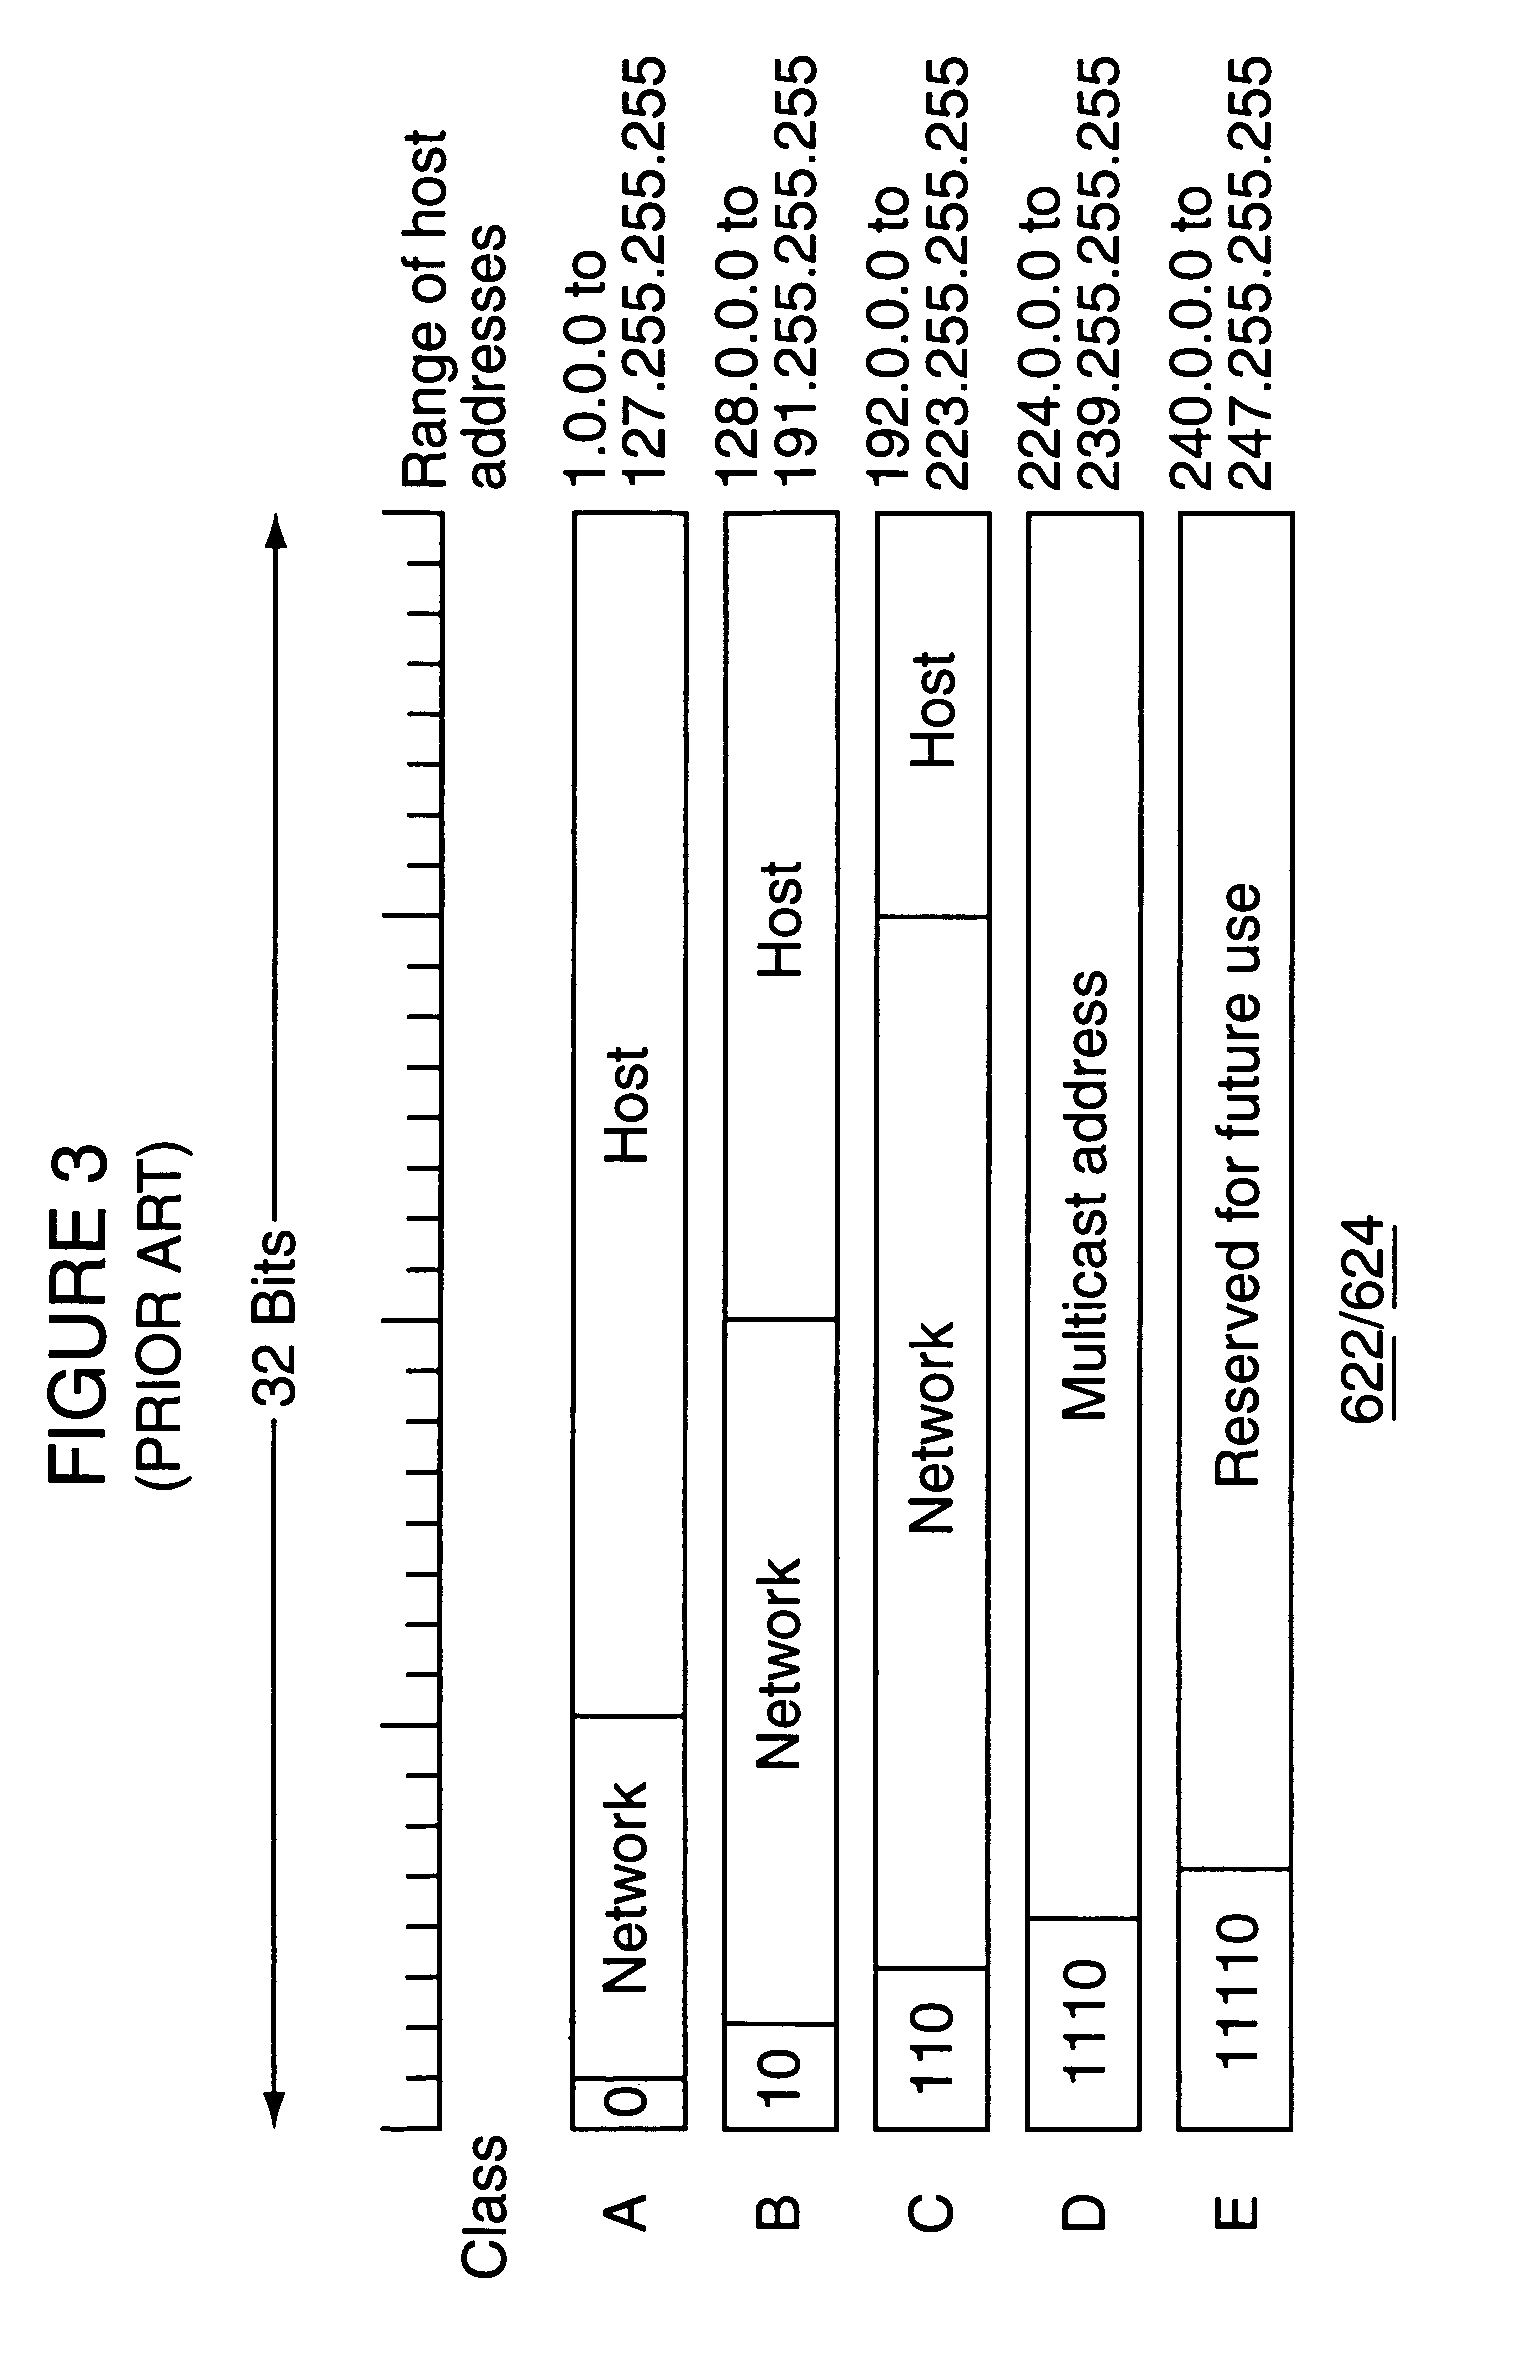 Simple peering in a transport network employing novel edge devices